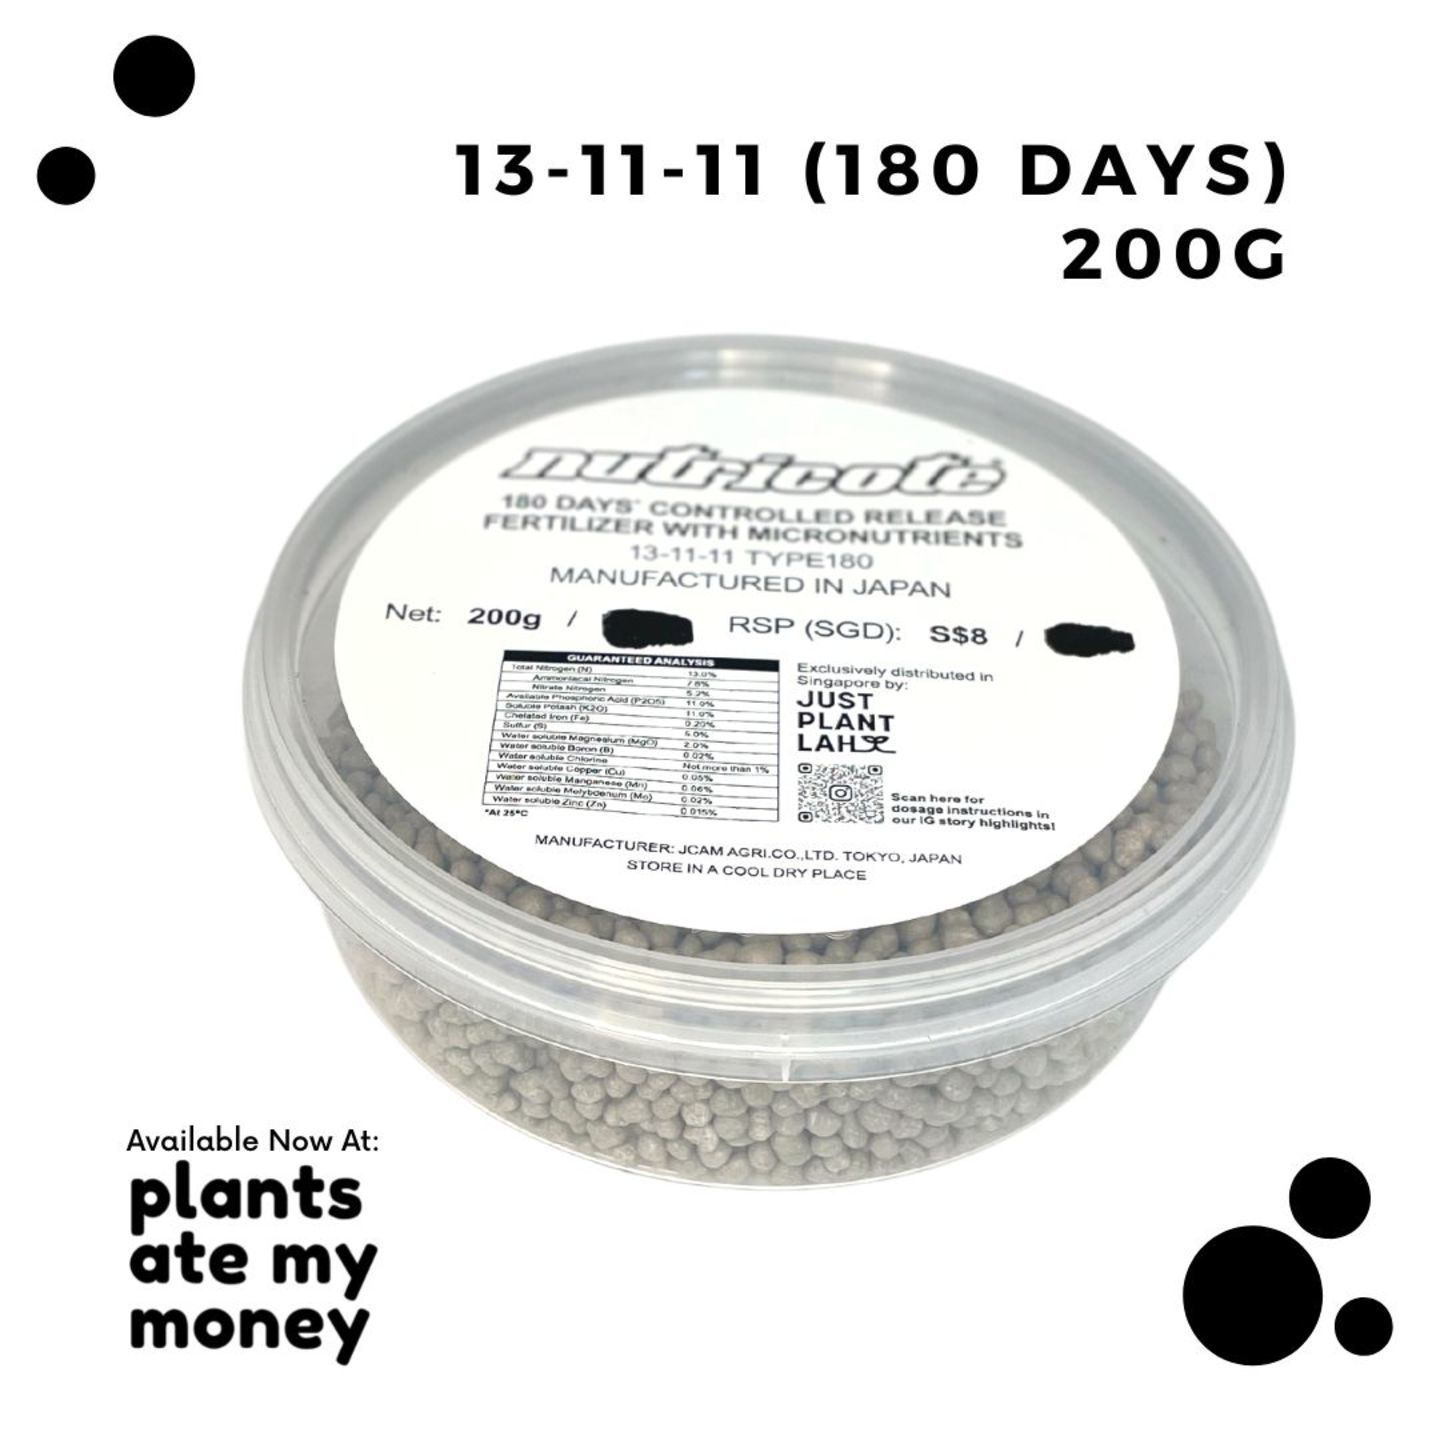 200g - 13-11-11 180 Days Nutricote Controlled Release Fertilizer with Micronutrients